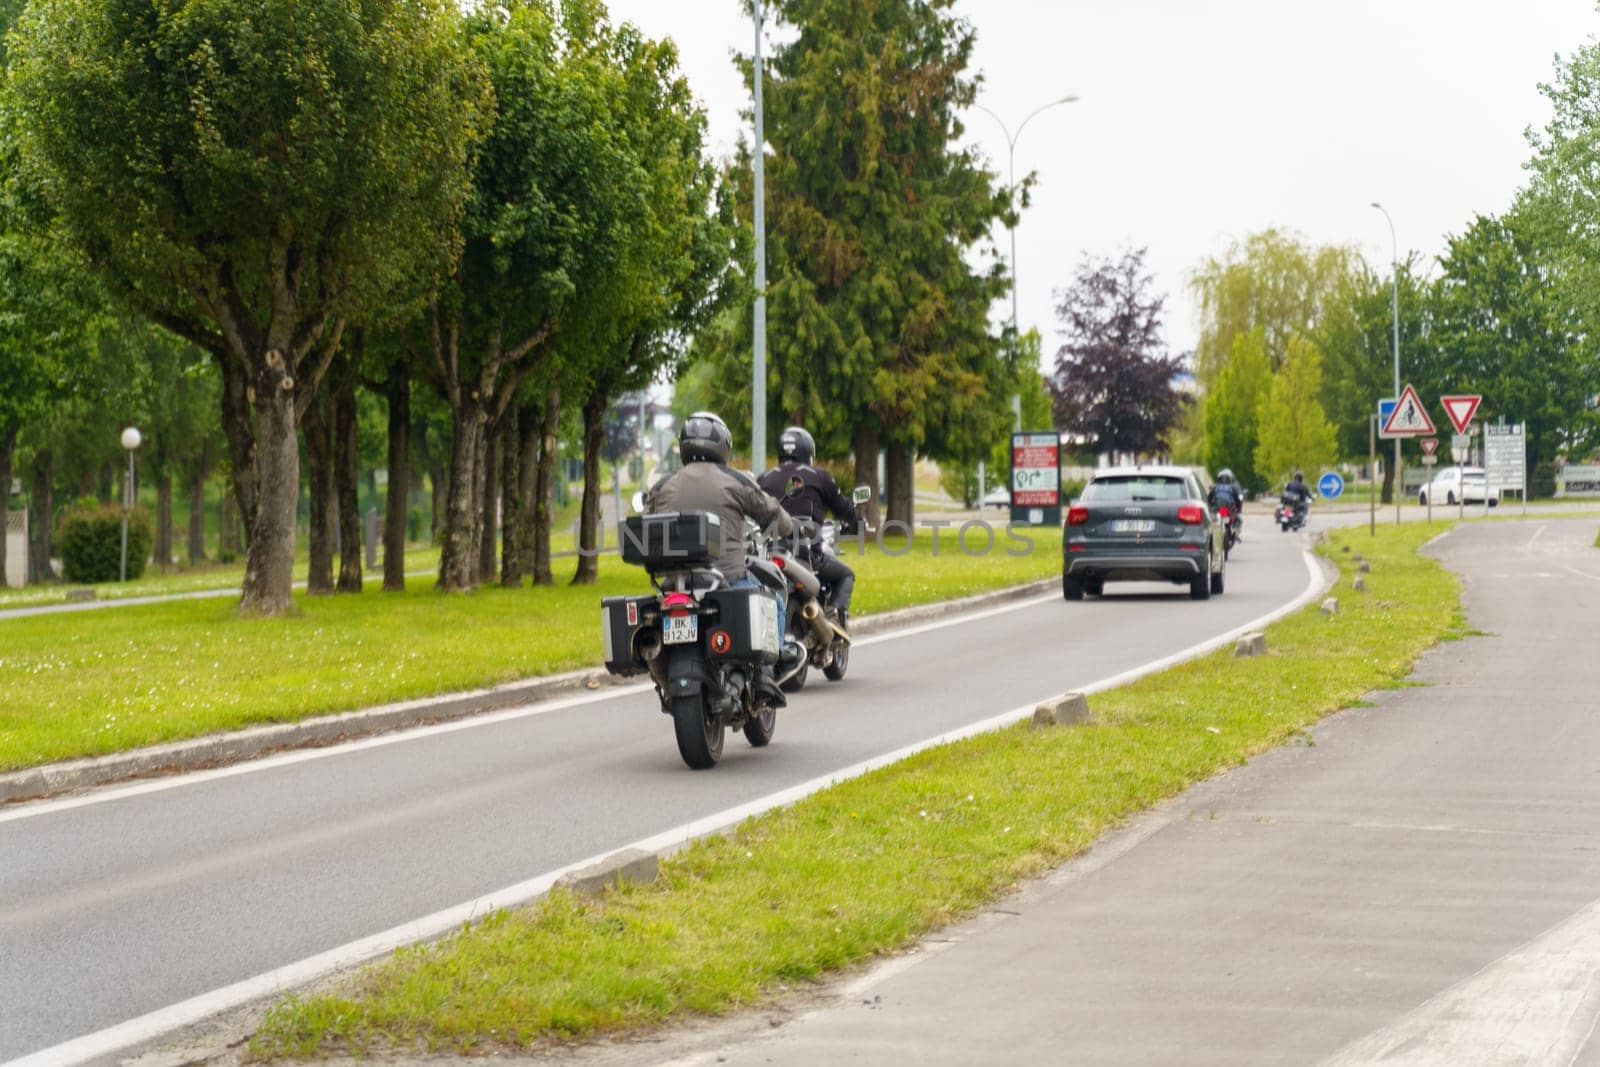 Cambrai, France - May 21, 2023: A group of individuals riding motorcycles down a city street. The riders are moving swiftly, with helmets on, and some are wearing leather jackets.